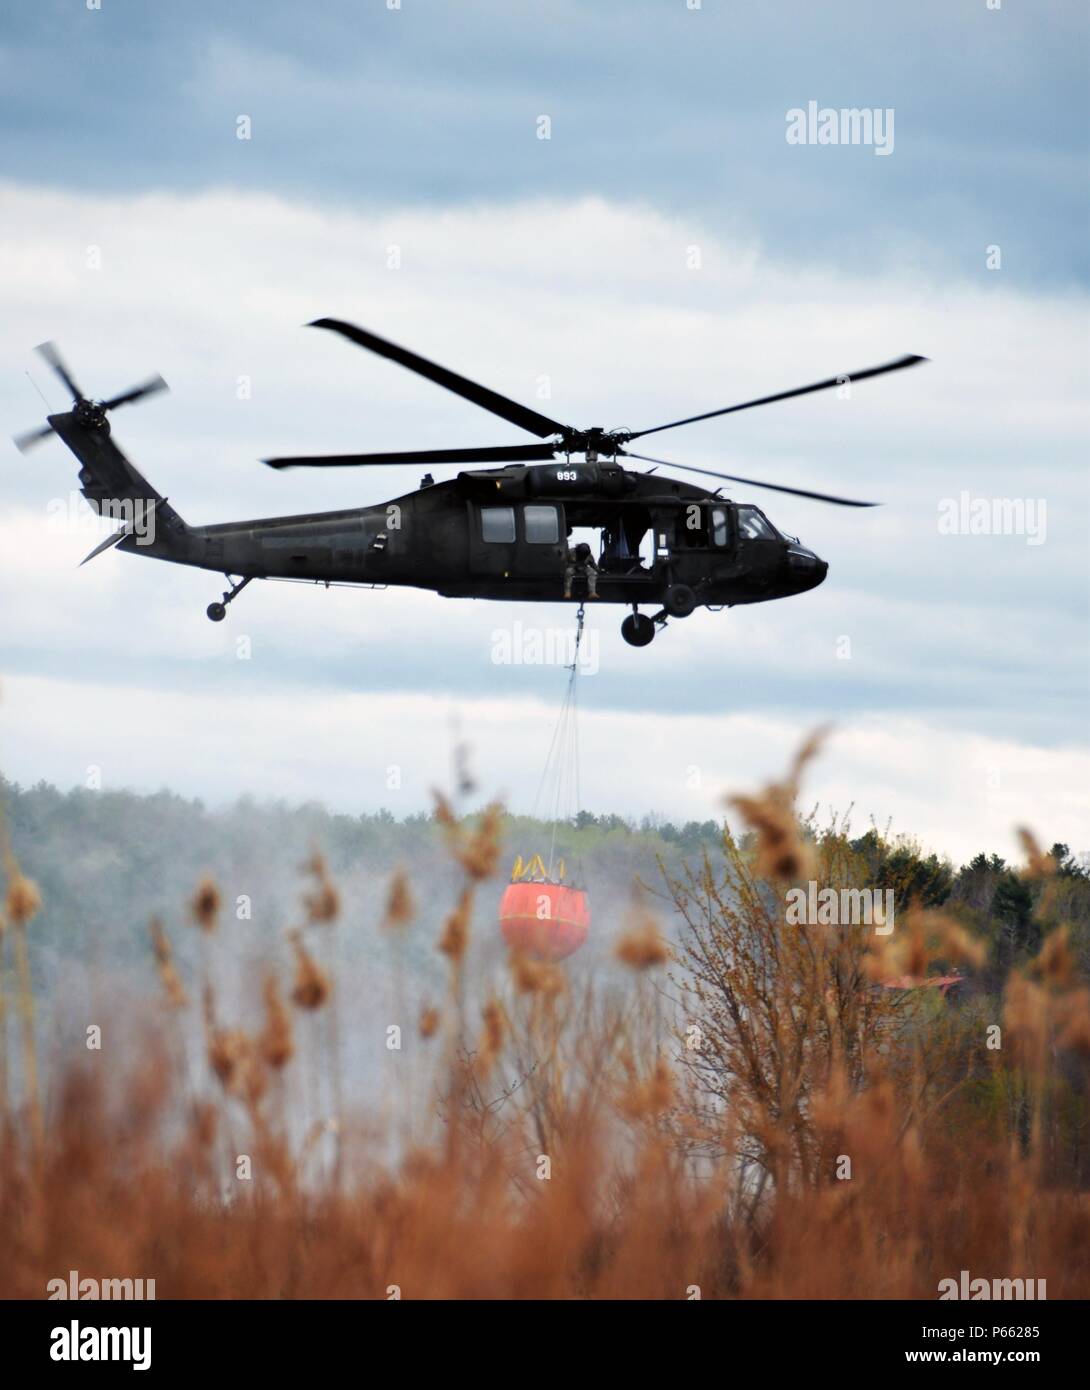 A New York Army National Guard UH-60 Blackhawk based in Latham, N.Y. hovers in place while doing swift load and drop water bucket training at Round Lake N.Y.on Thursday May 5, 2016. The National Guard conducts this training annually to practice flying with that much additional weight under the aircraft. The Soldiers are part of the 42nd Combat Aviation Brigade. (U.S. Army National Guard Photo by Capt. Jean Marie Kratzer/ Released) Stock Photo